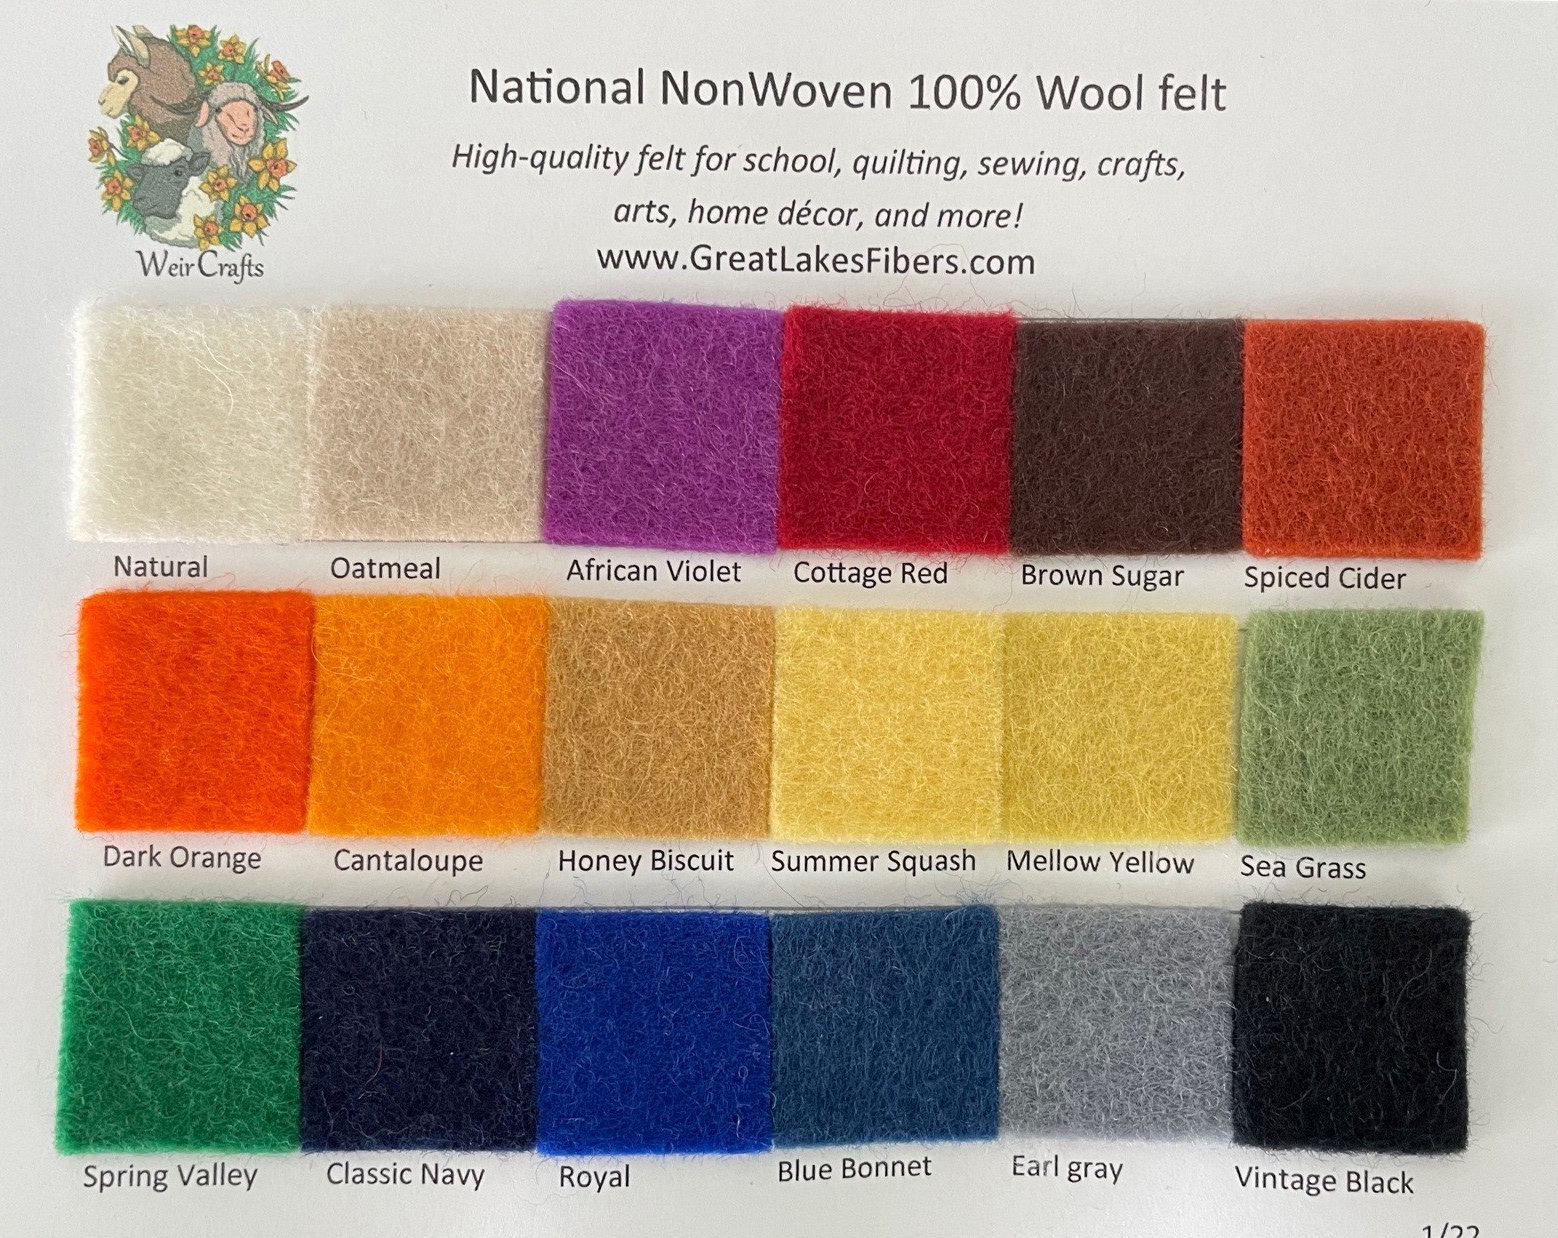 Swatch Card: 100% Wool Felt from National Nonwovens